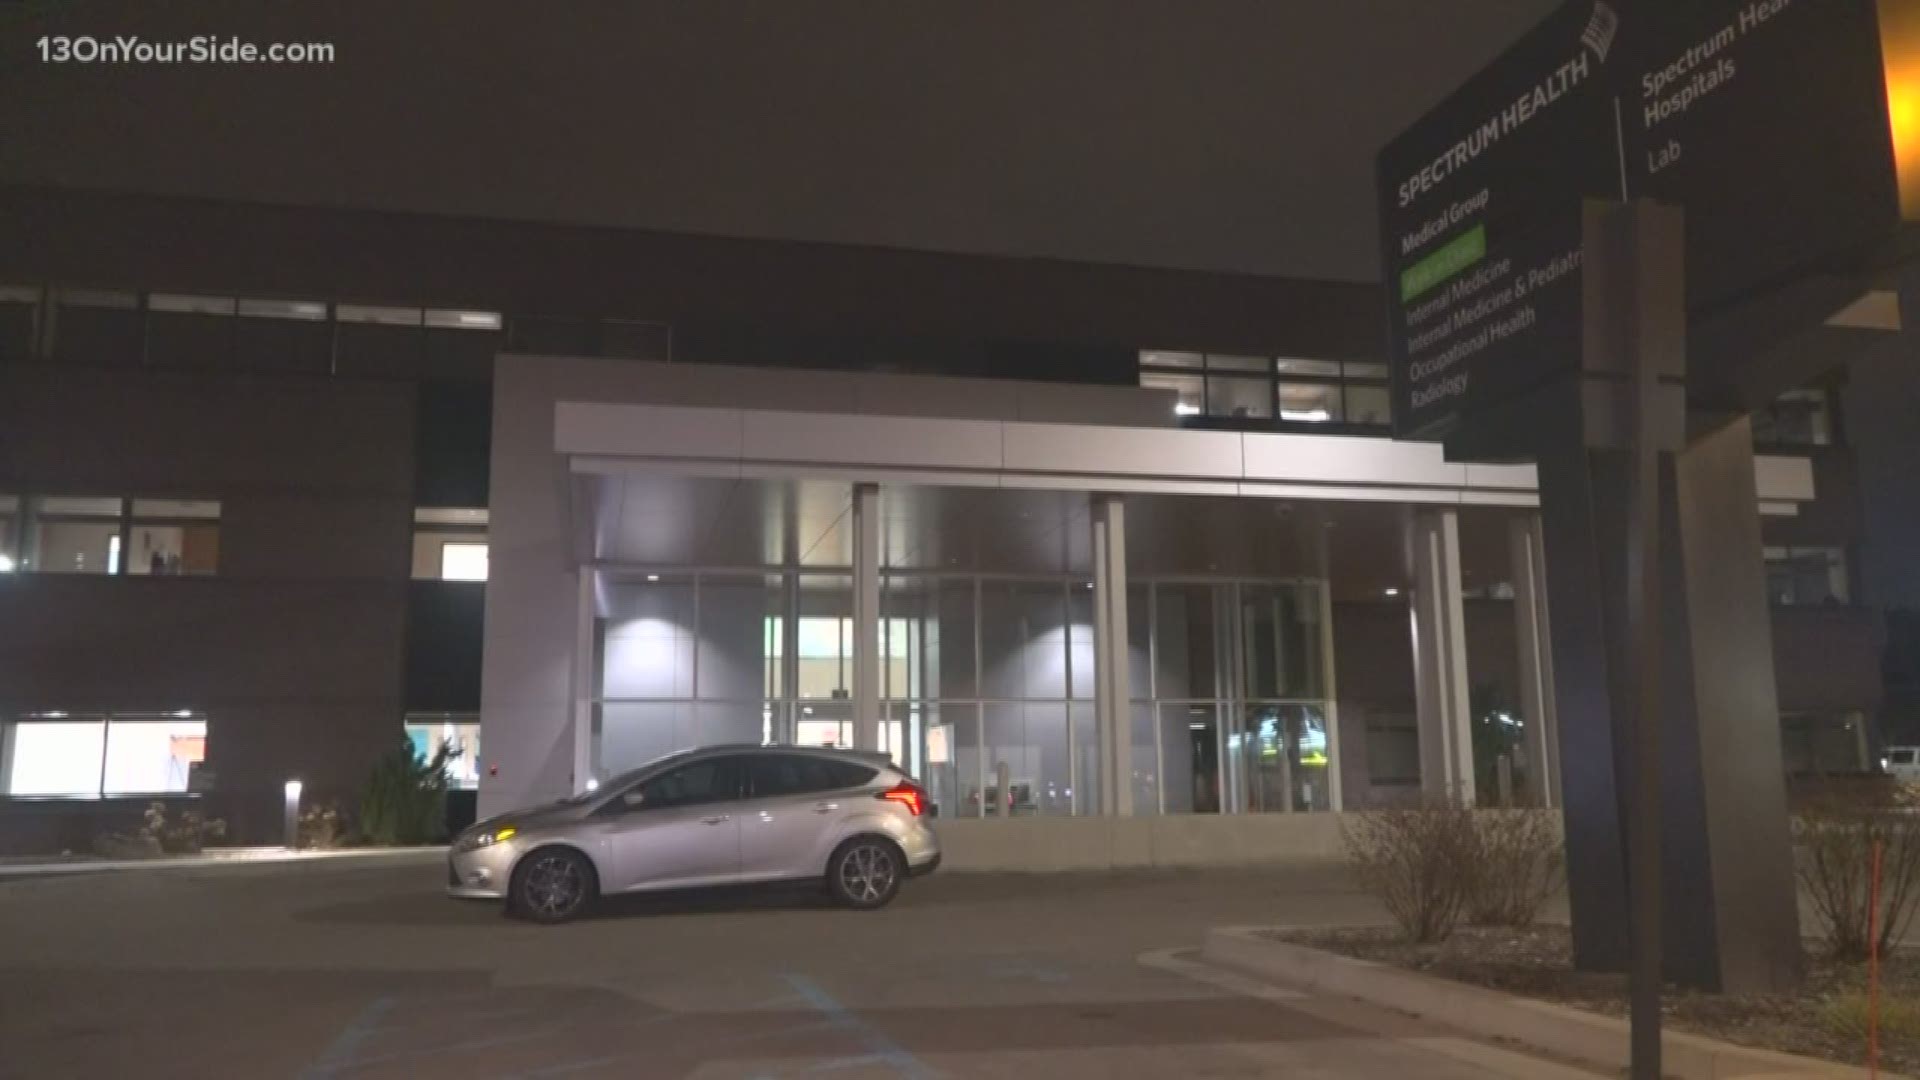 Spectrum Health is closing all walk-in clinics in West Michigan and encouraging people to connect virtually with a provider.